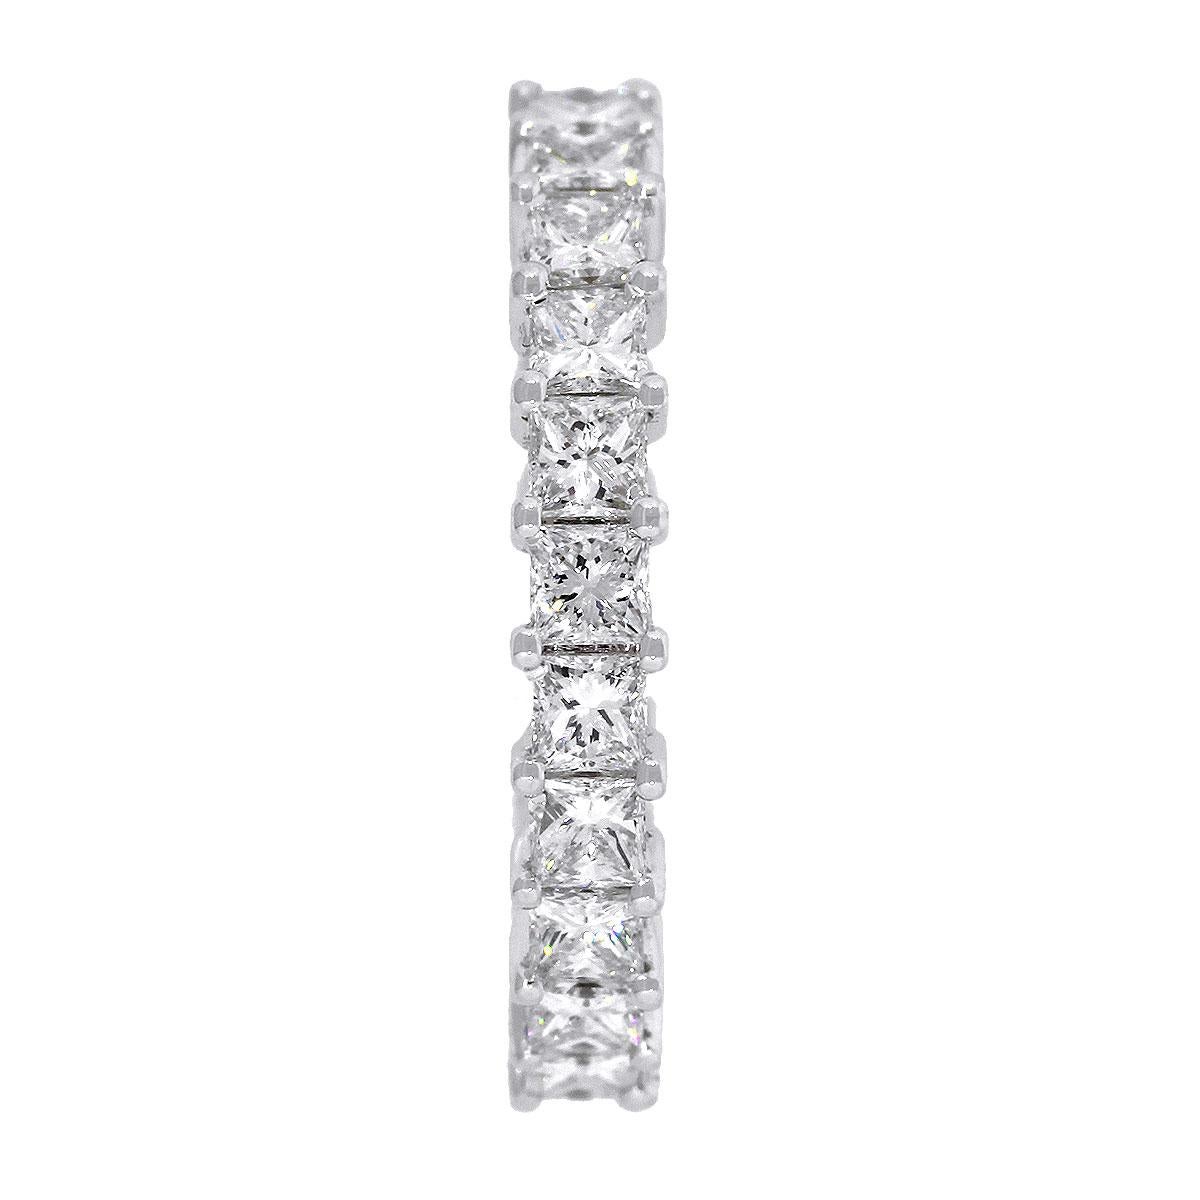 Material: 14k White gold
Diamond Details: Approximately 2.05ctw of Princess Cut diamonds. Diamonds are G/H in color and VS in clarity.
Size: 6.5
Total Weight: 2.1g (1.3dwt)
Measurements: 0.80″ x 0.20″ x 0.80″
SKU: A30311878